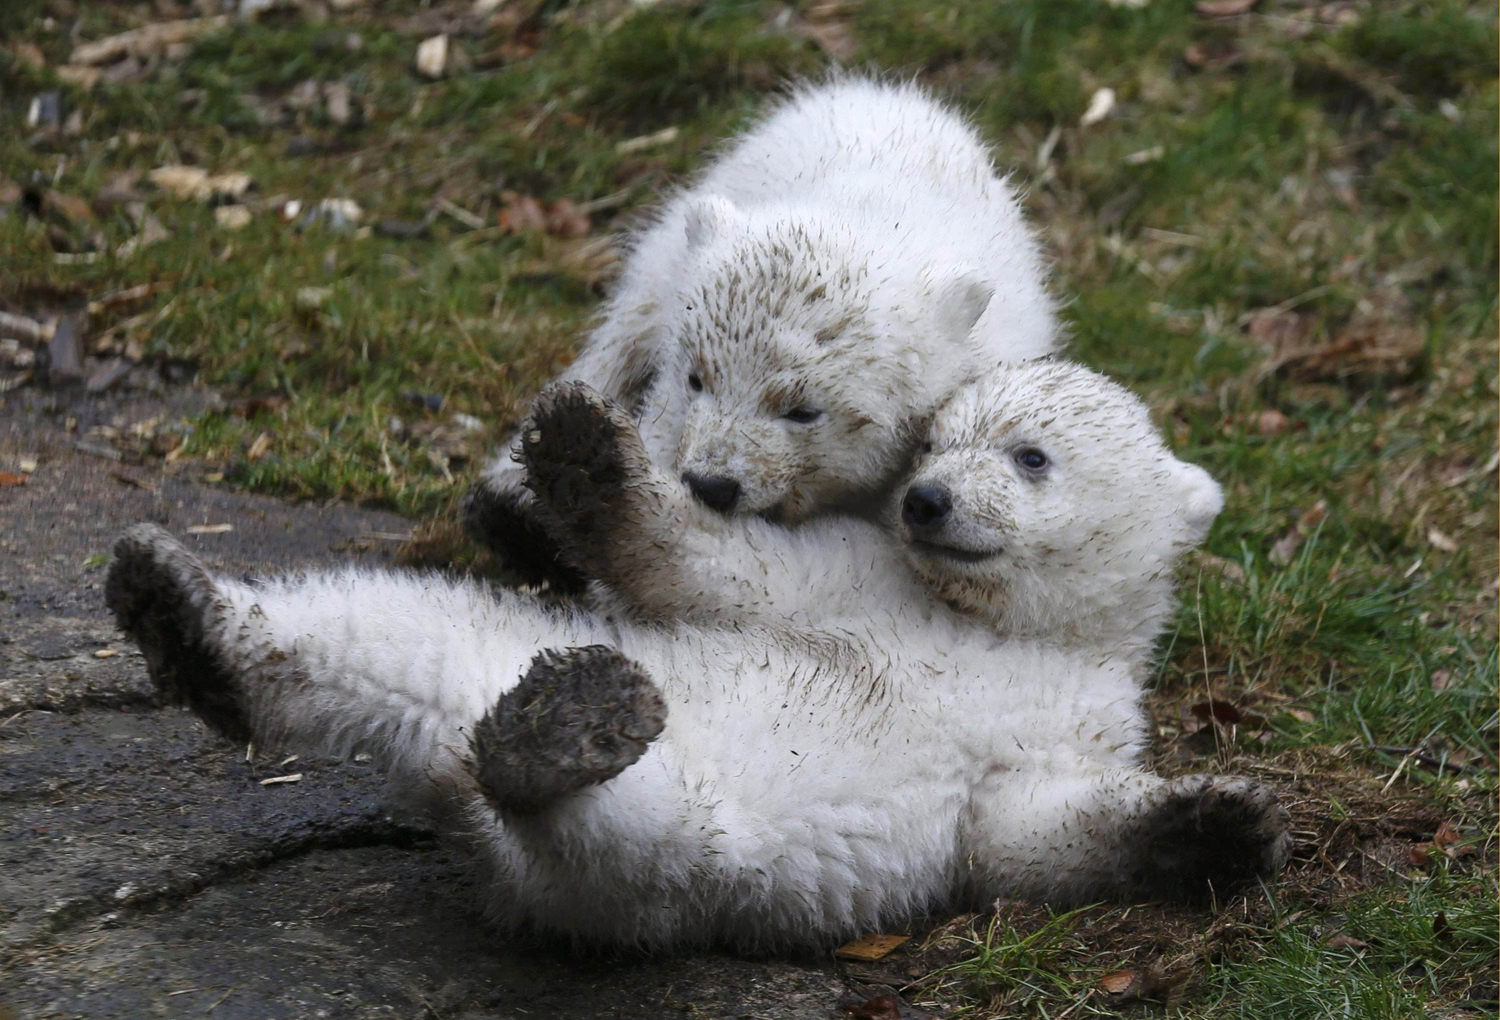 14 week-old twin polar bear cubs play during their first presentation to the media in Hellabrunn Zoo on March 19, 2014 in Munich. The male and female twins were born on Dec. 9, 2013 in the zoo.